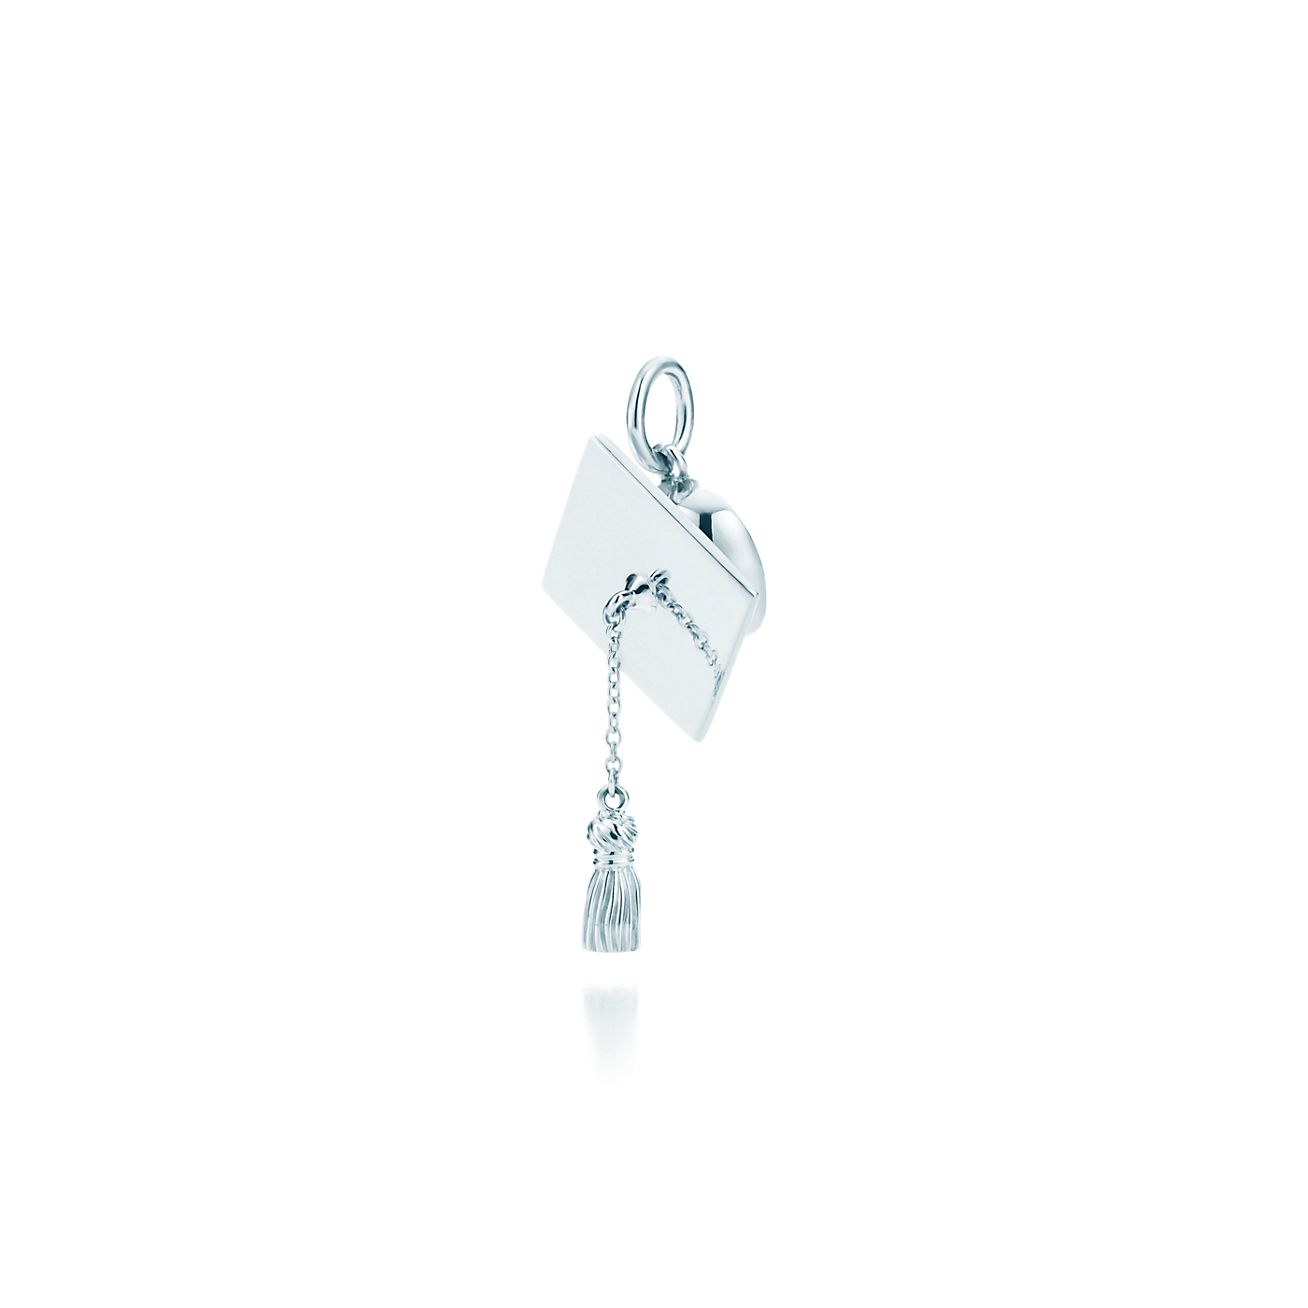 Cap and tassel charm in sterling silver 